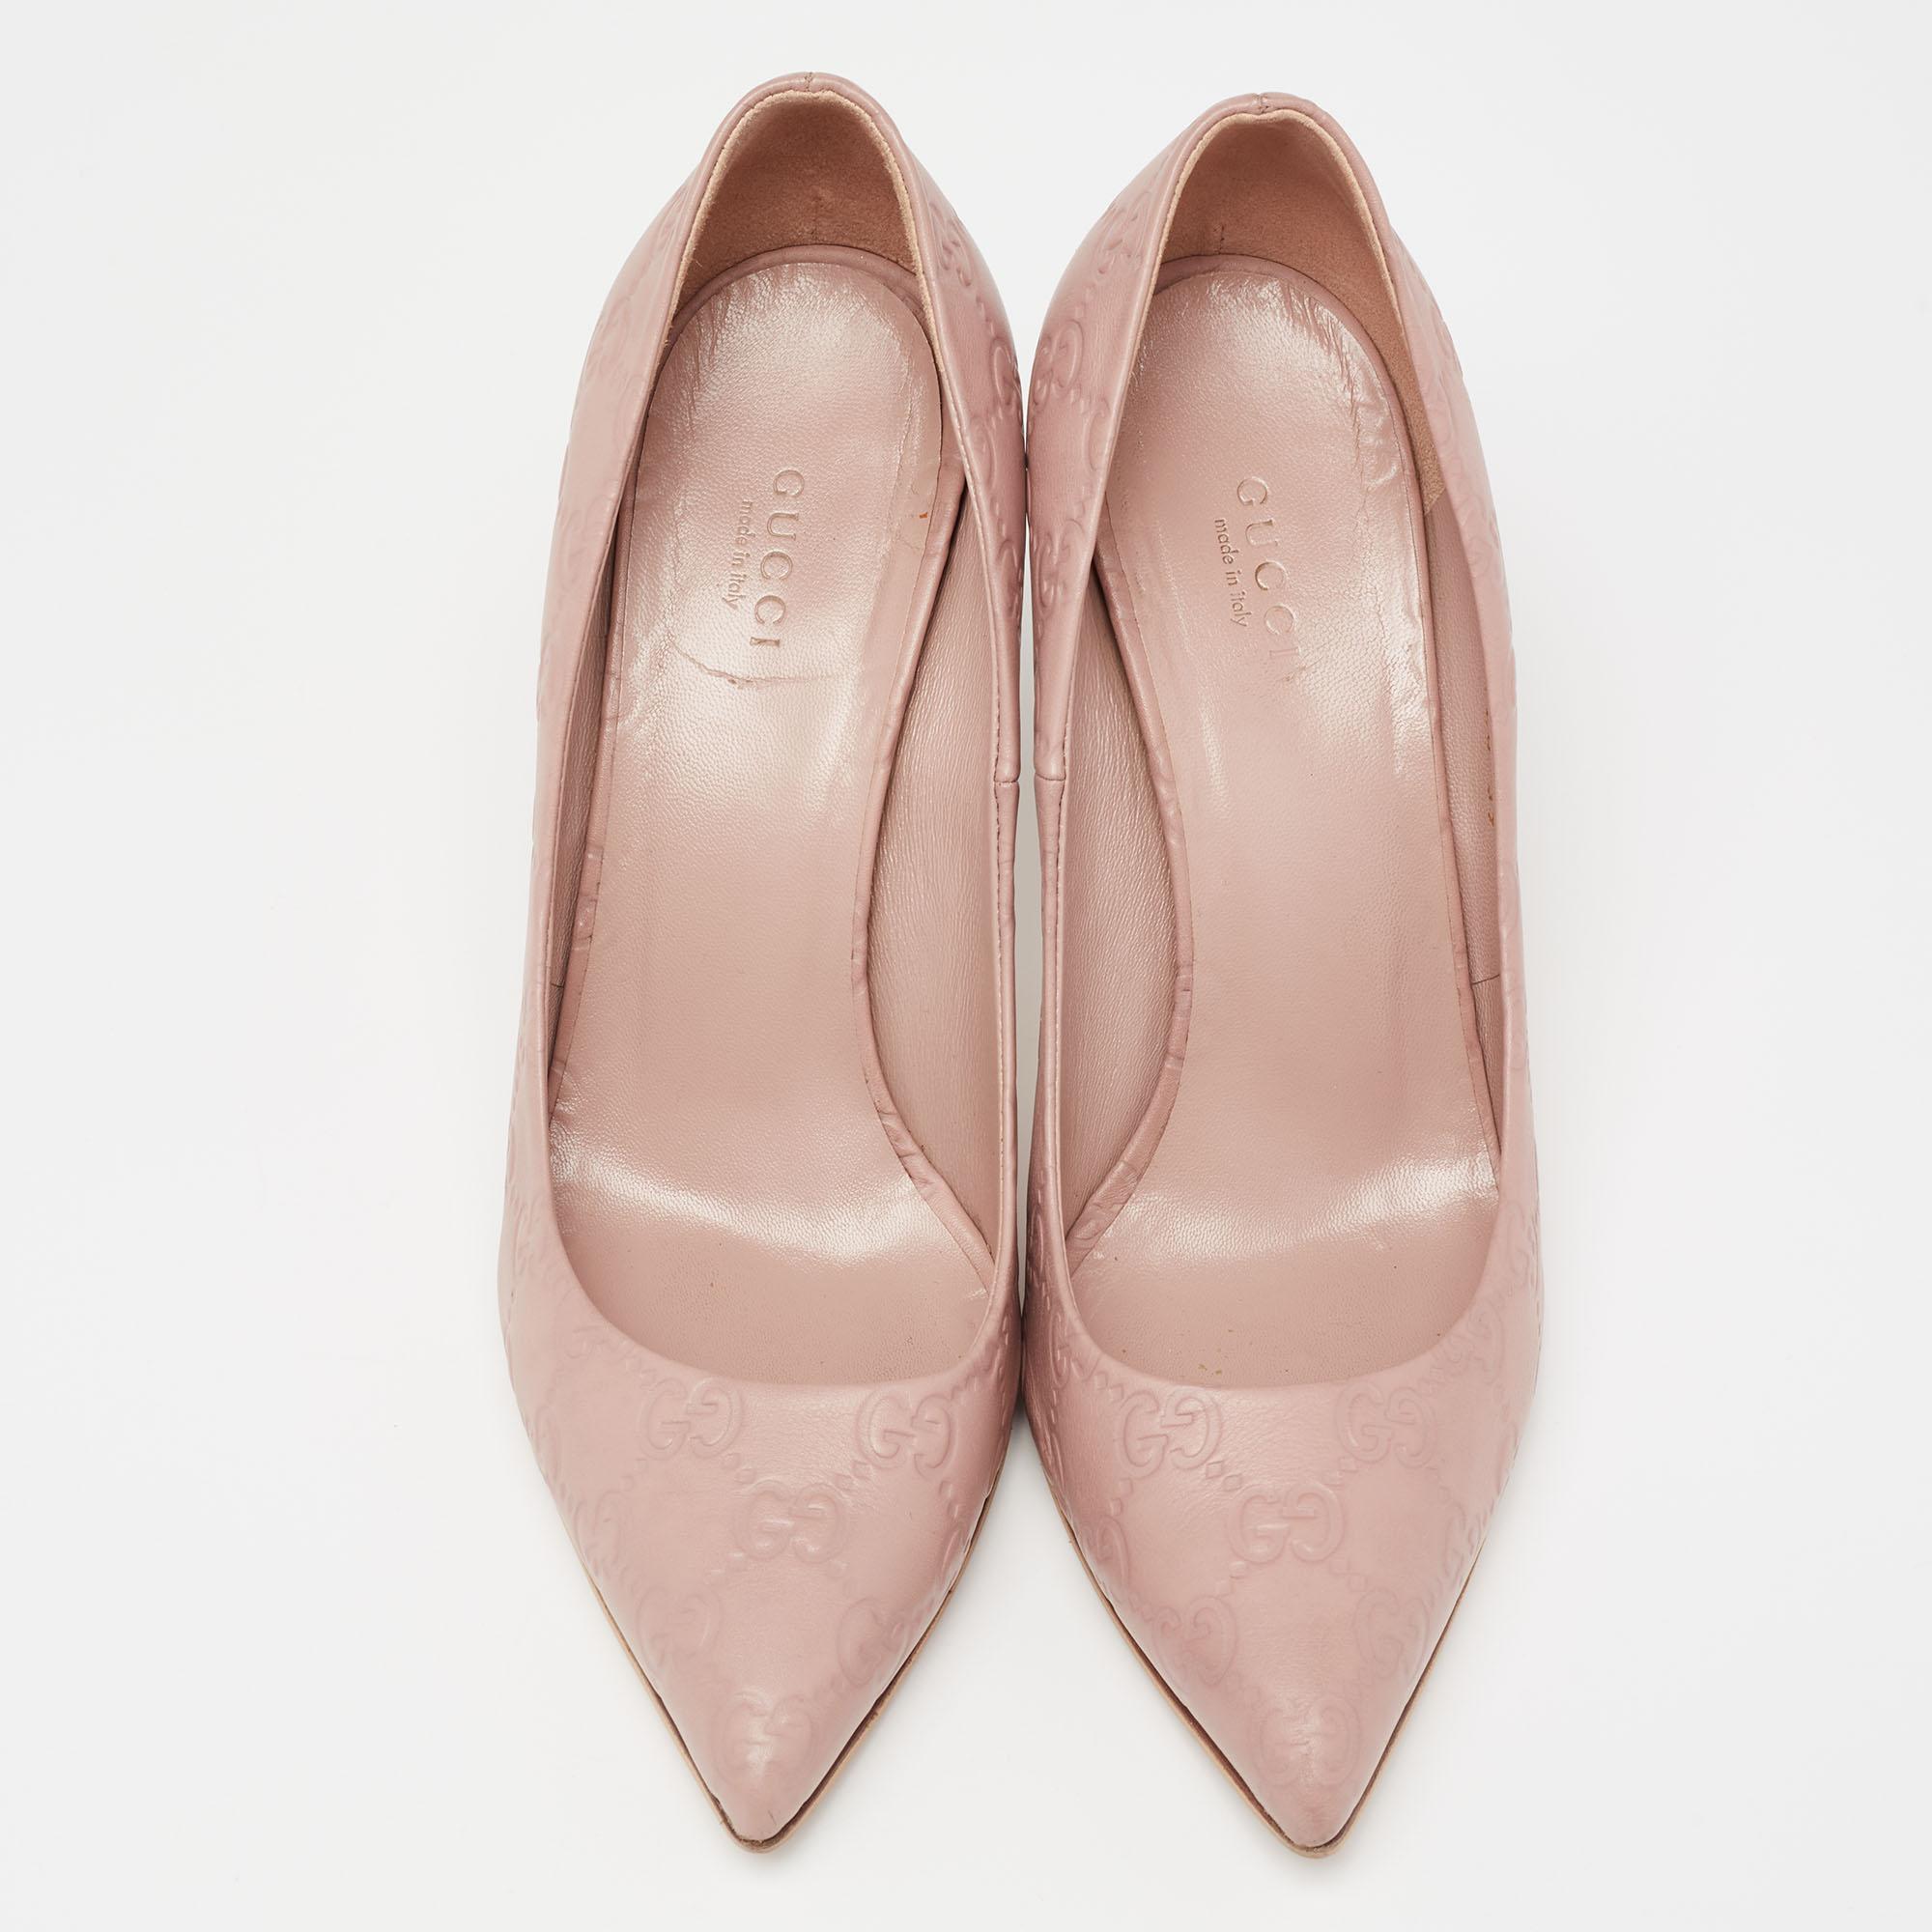 Gucci's timeless aesthetic and stellar craftsmanship in shoemaking is evident in these stunning pumps. Crafted from Guccissima leather in a dusty pink shade, they are designed with pointed-toes and mounted on bamboo heels for the right amount of